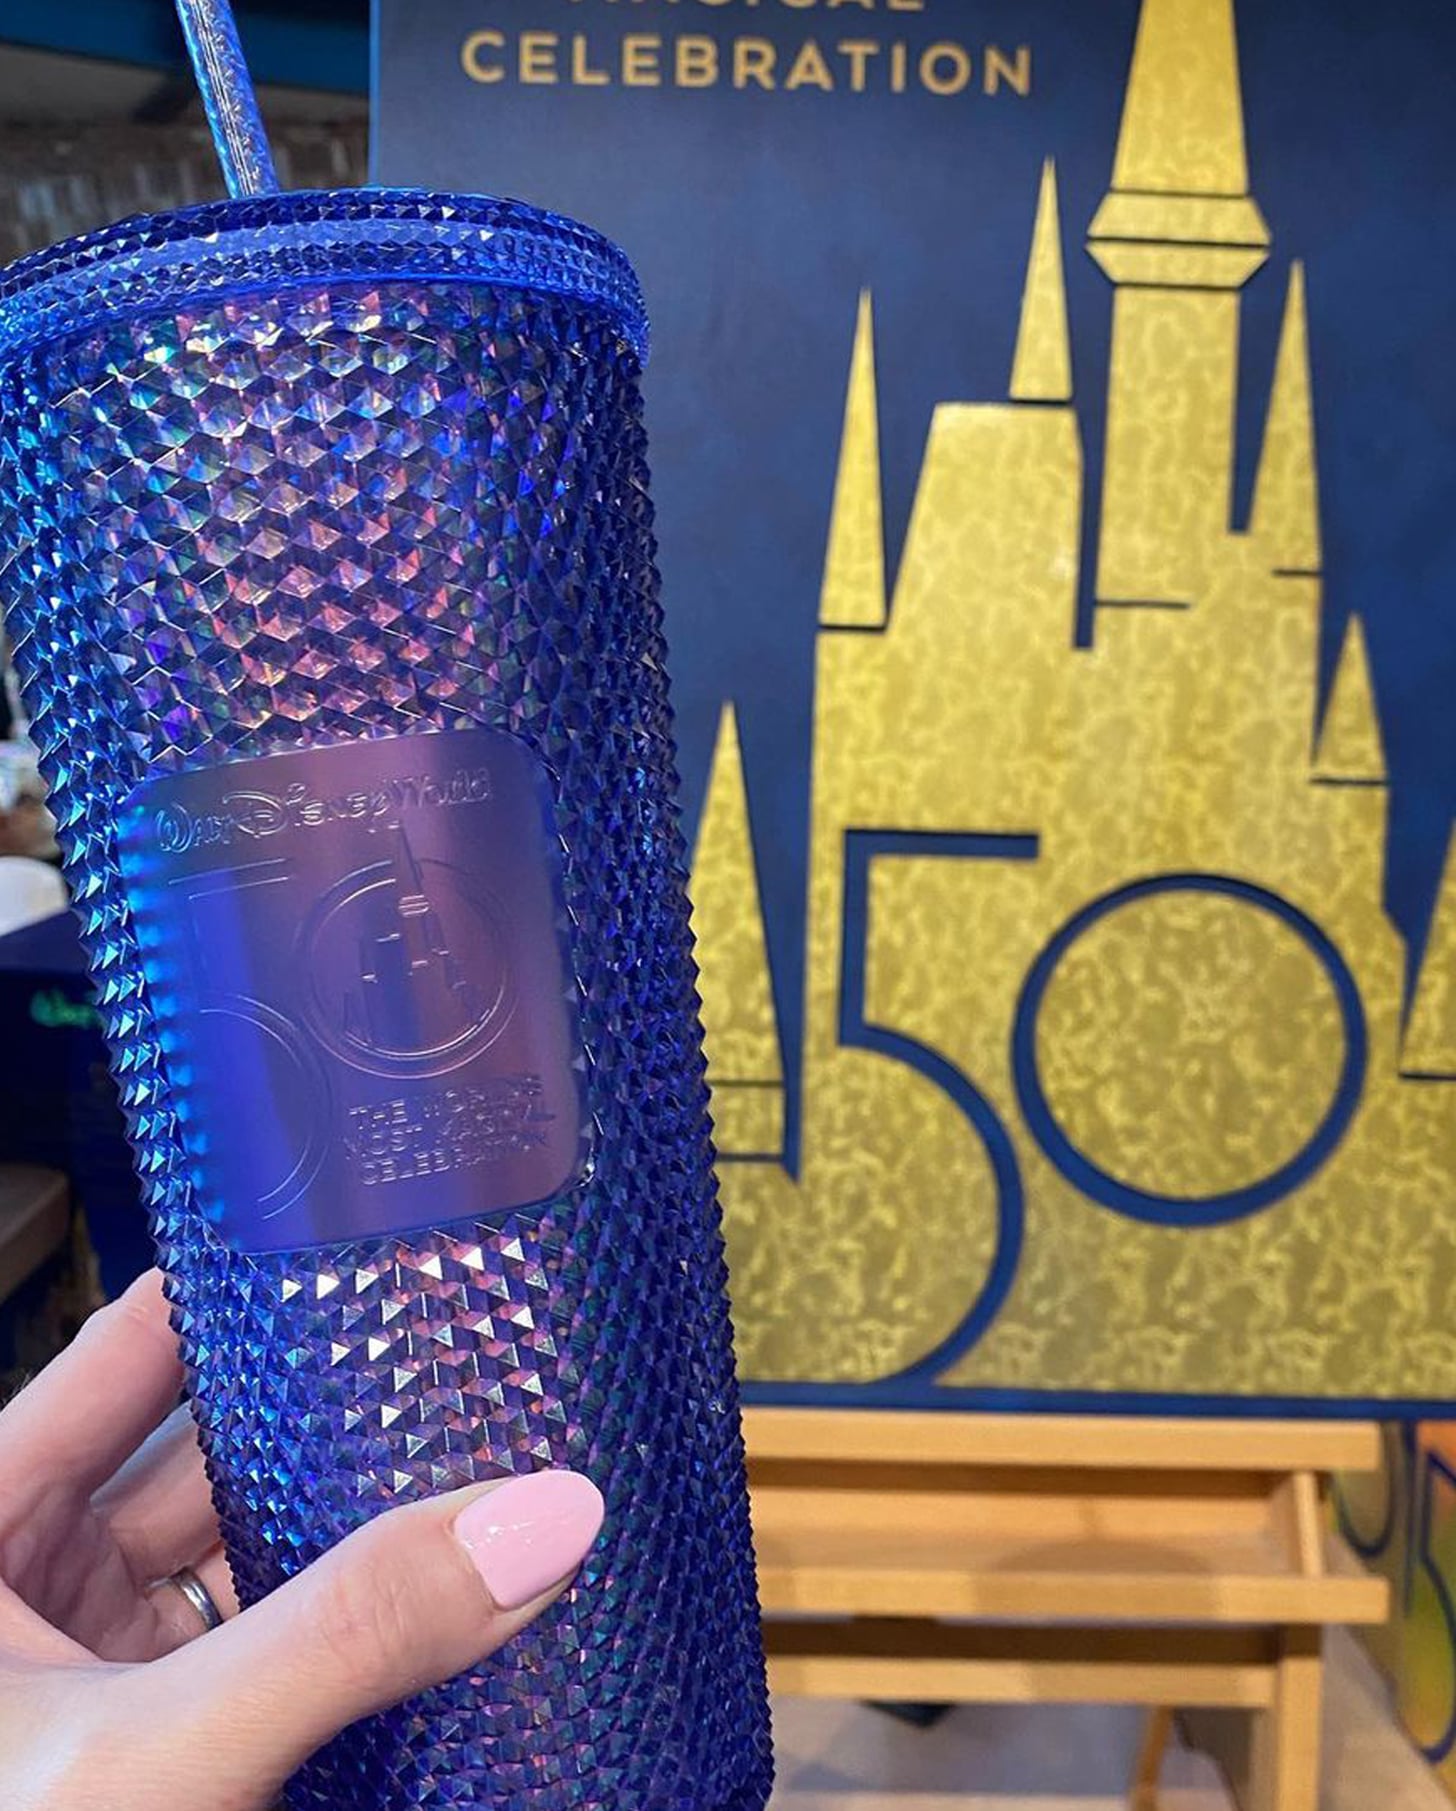 PHOTOS: New Holiday Starbucks Tumblers Have Arrived in Disney